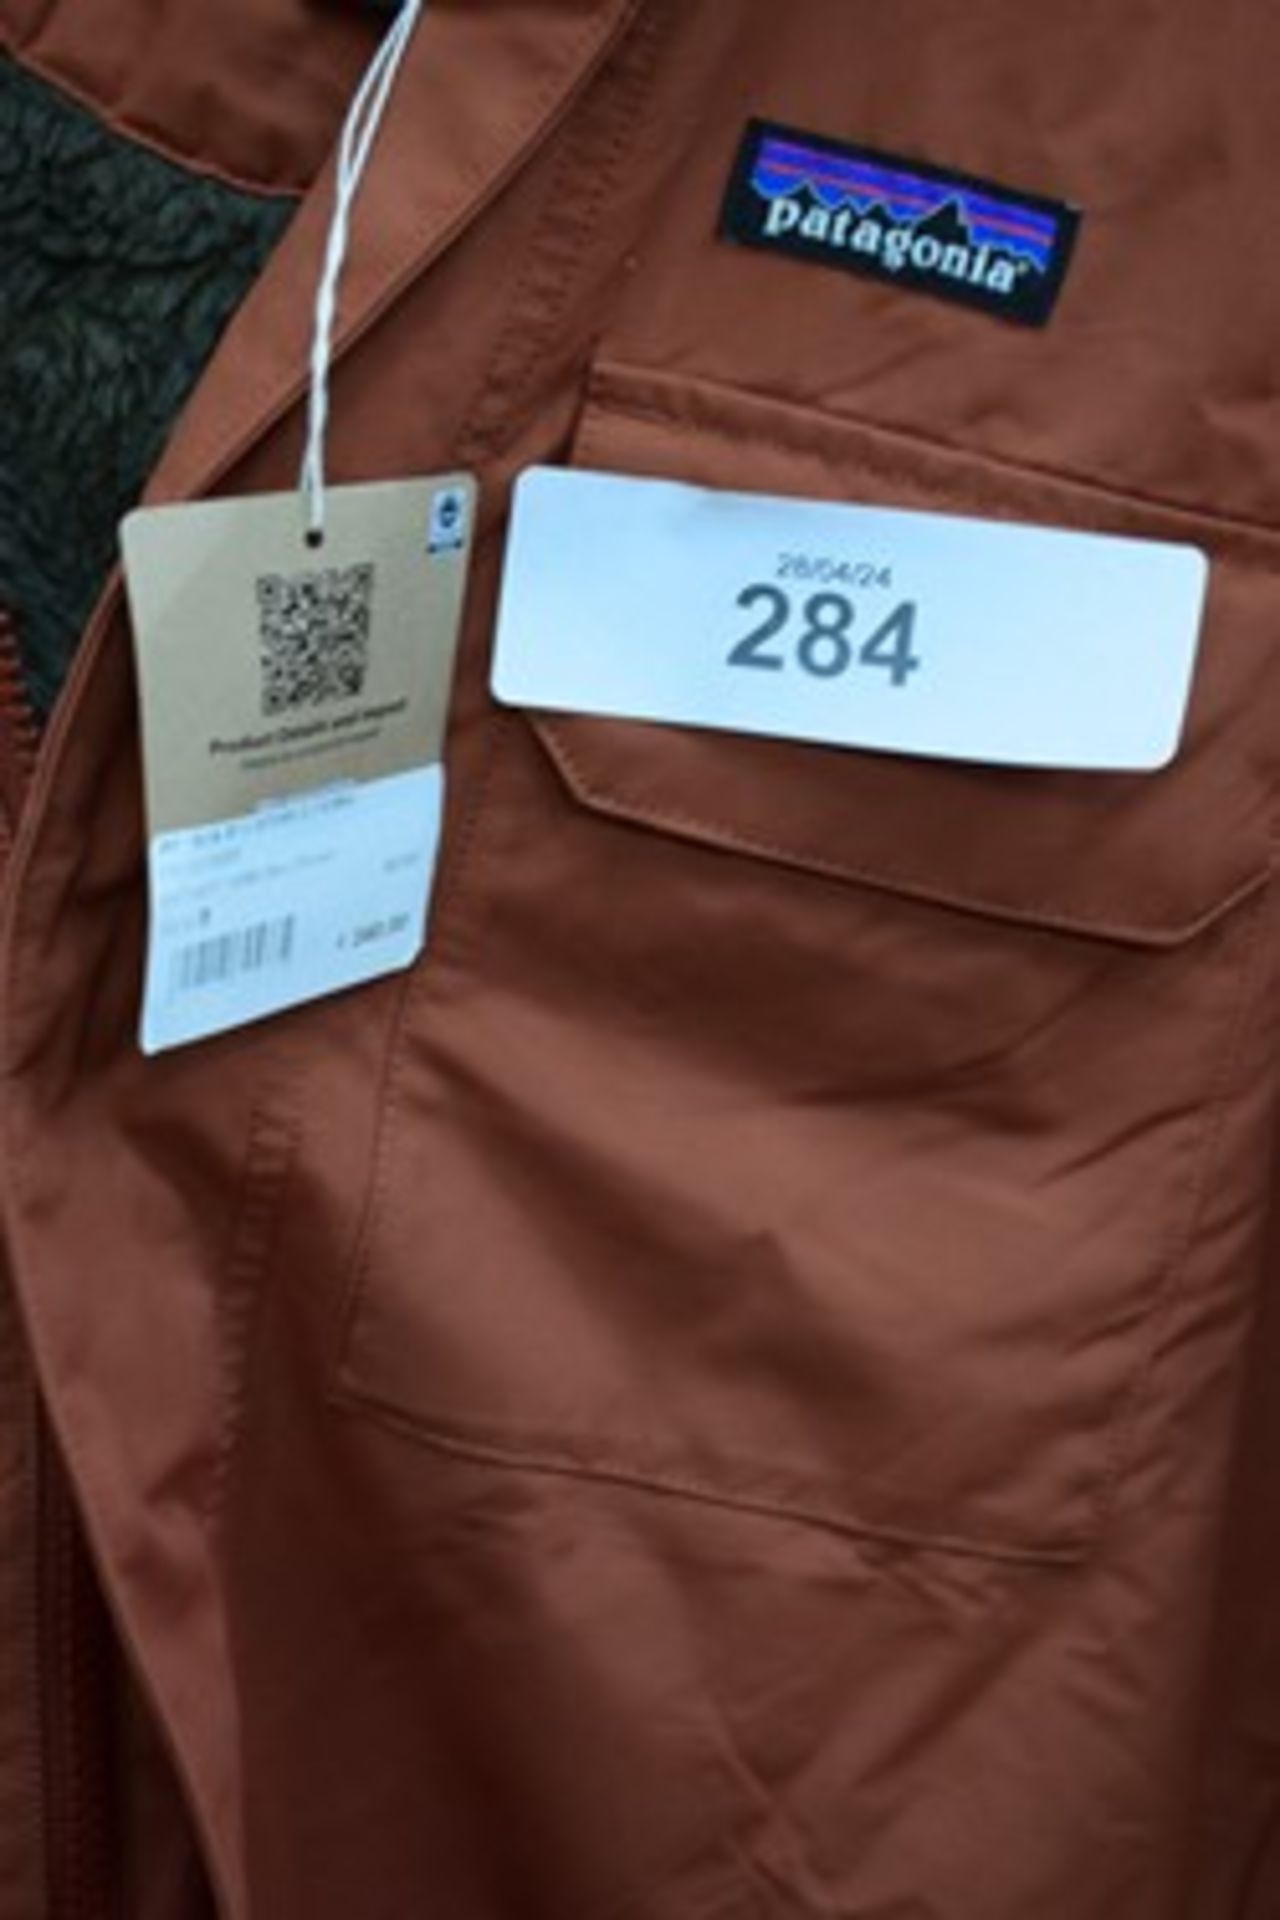 1 x Patagonia Isthmus SBU brown parka coat, size S, RRP: Â£240 - new with labels (CR1) - Image 2 of 2